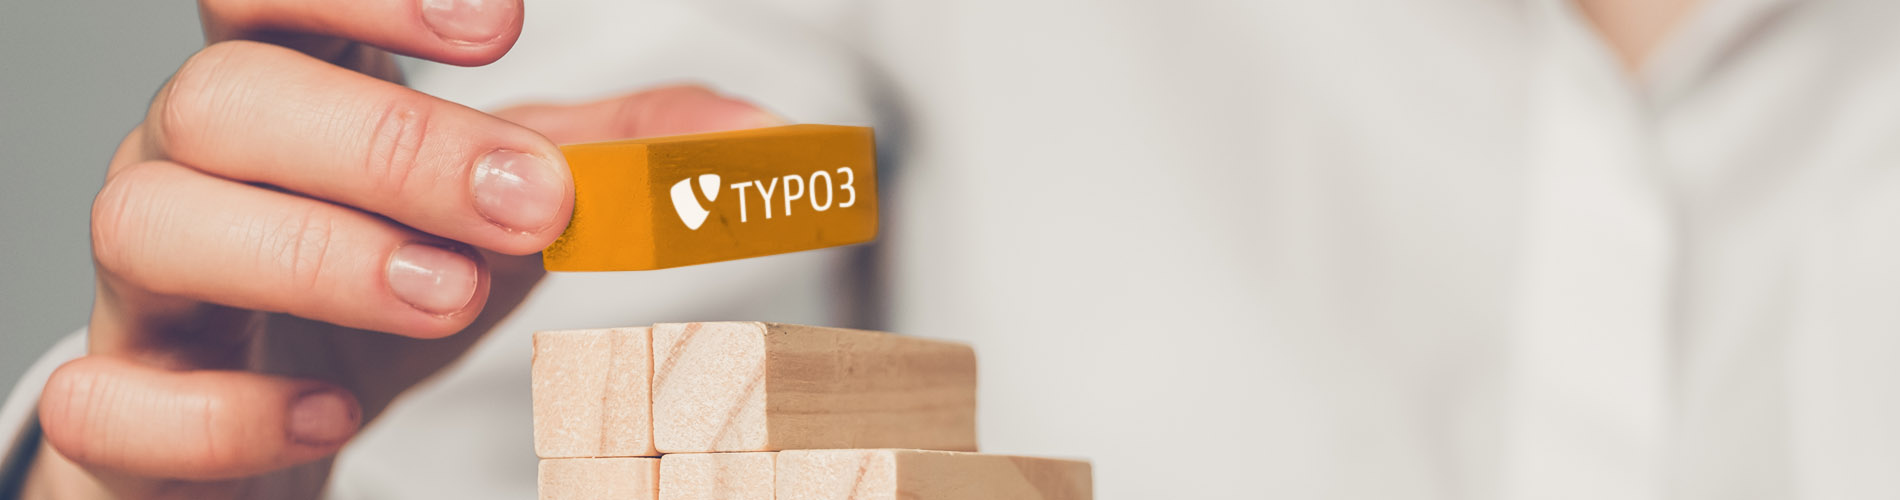 Key Steps to Take Before & After Changing TYPO3 Template